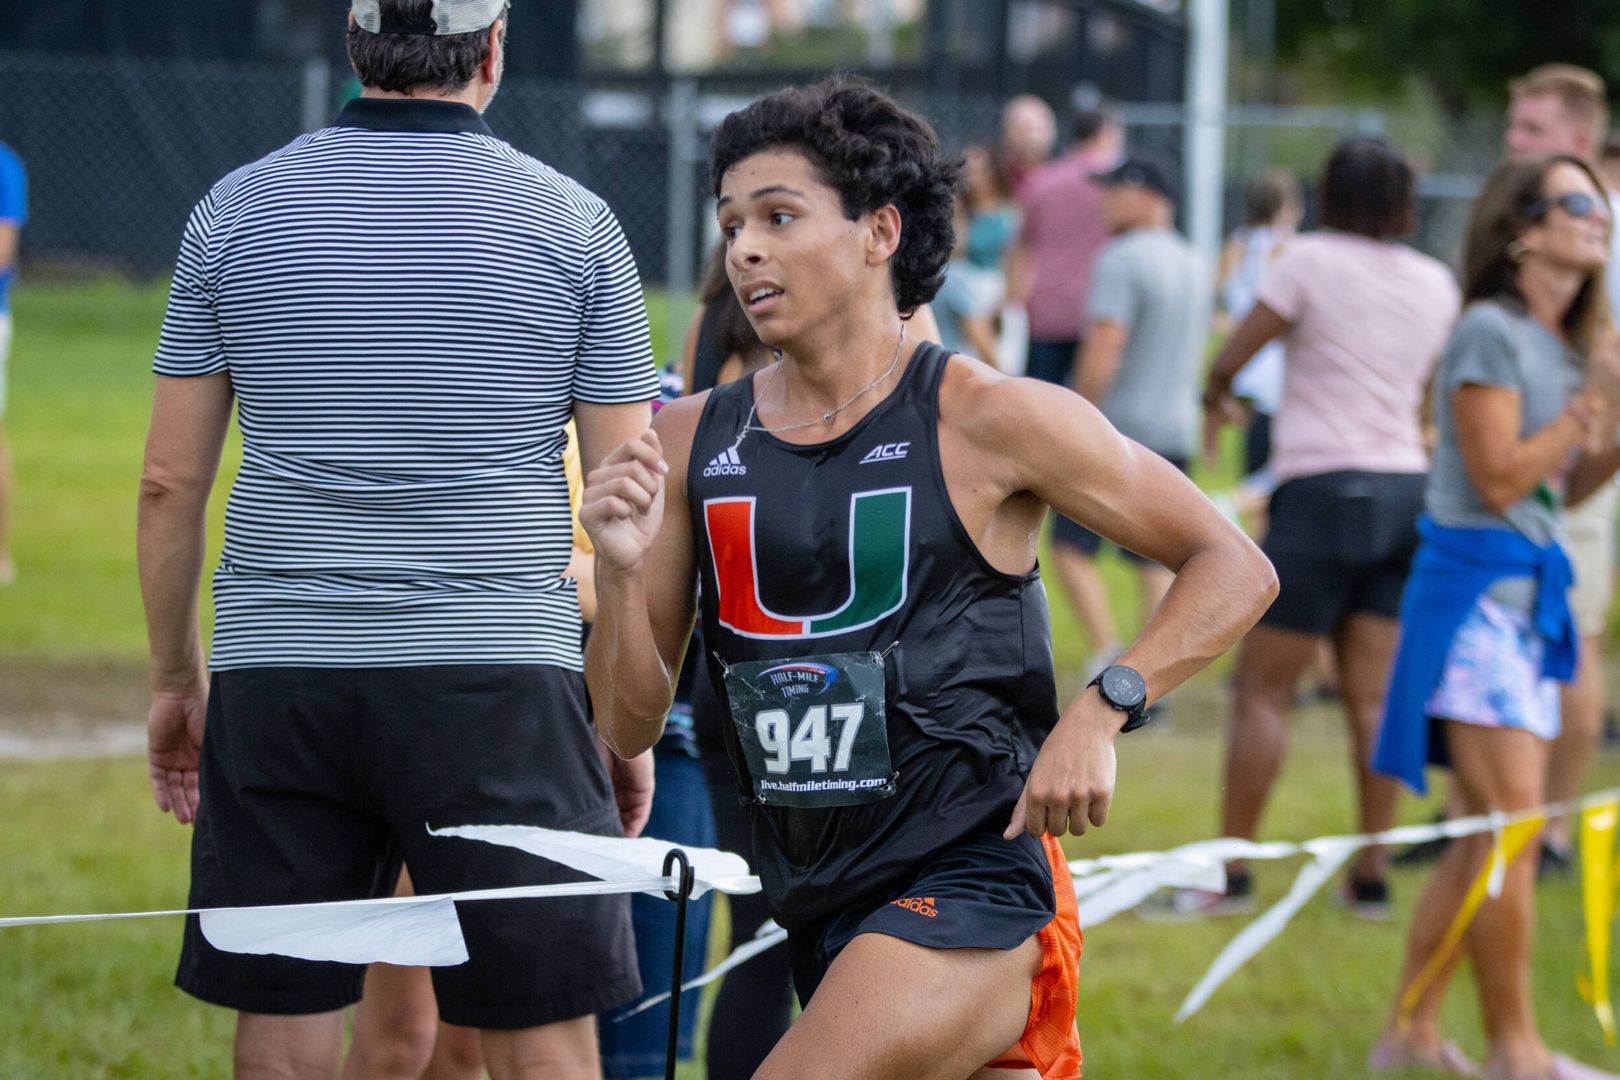 Hurricanes Look To Shine In Alabama Before ACC Championships